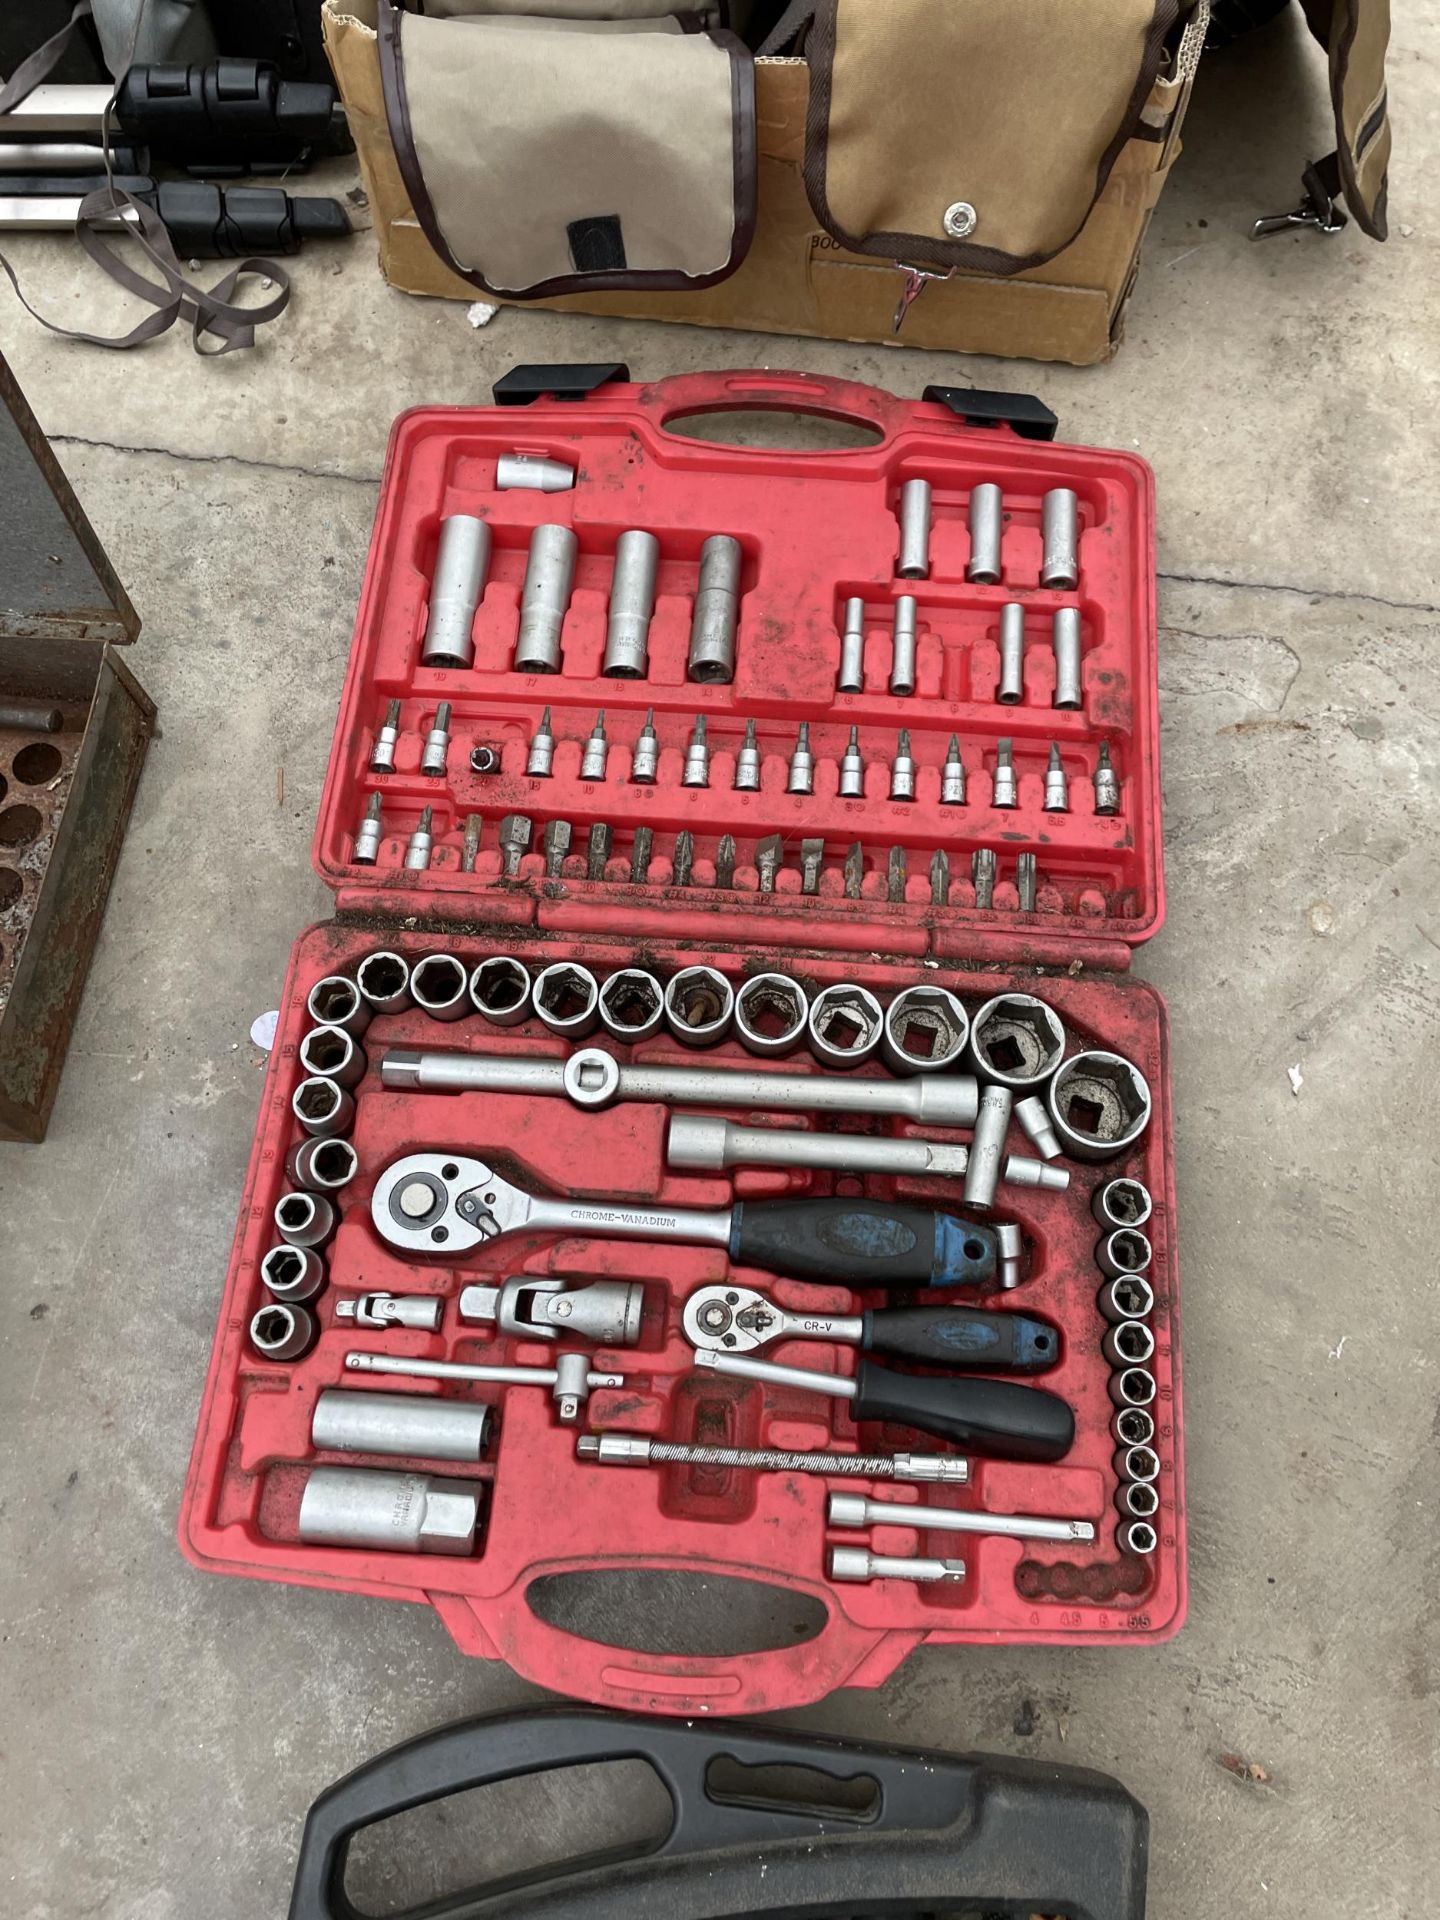 AN ASSORTMENT OF TOOLS TO INCLUDE A SOCKET SET AND A SCREW DRIVER SET - Image 2 of 2